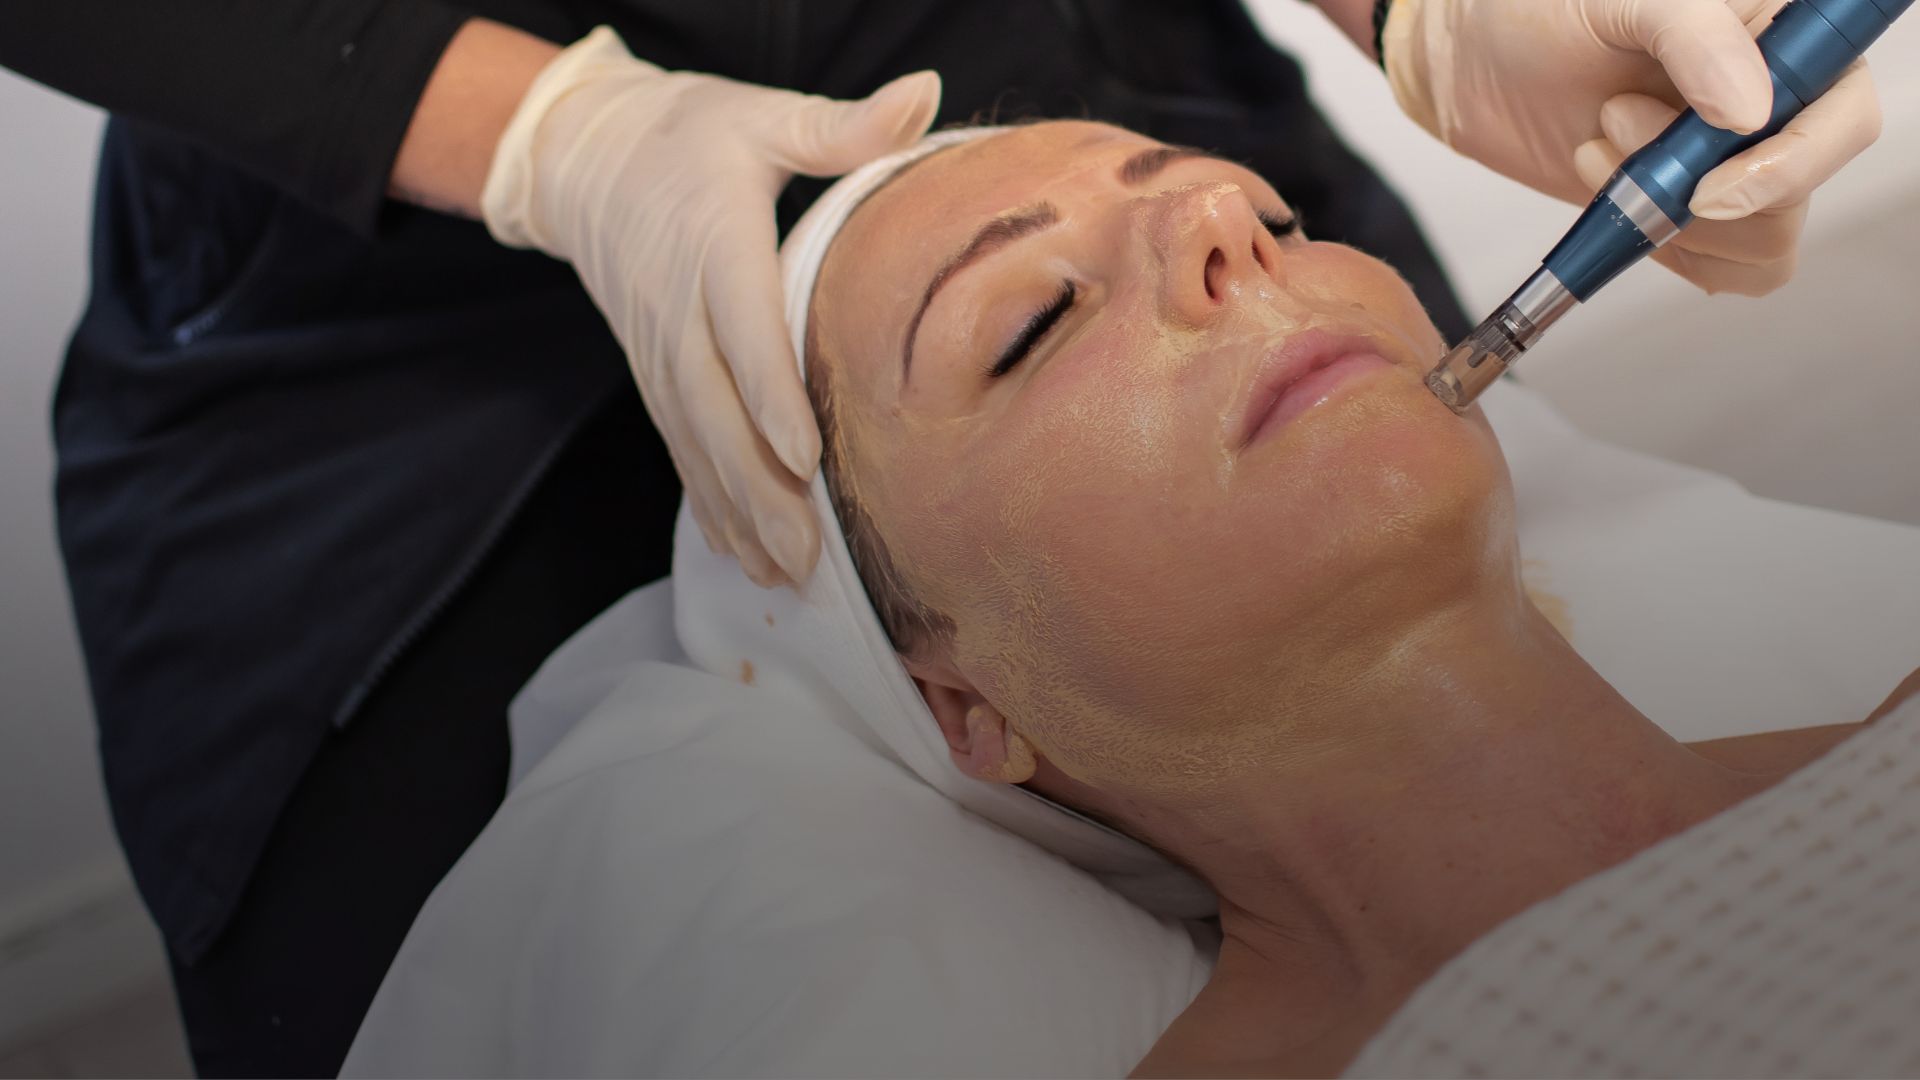 Get the Glass Skin Look with BB Glow, the Latest Korean Skin Treatment in Perth